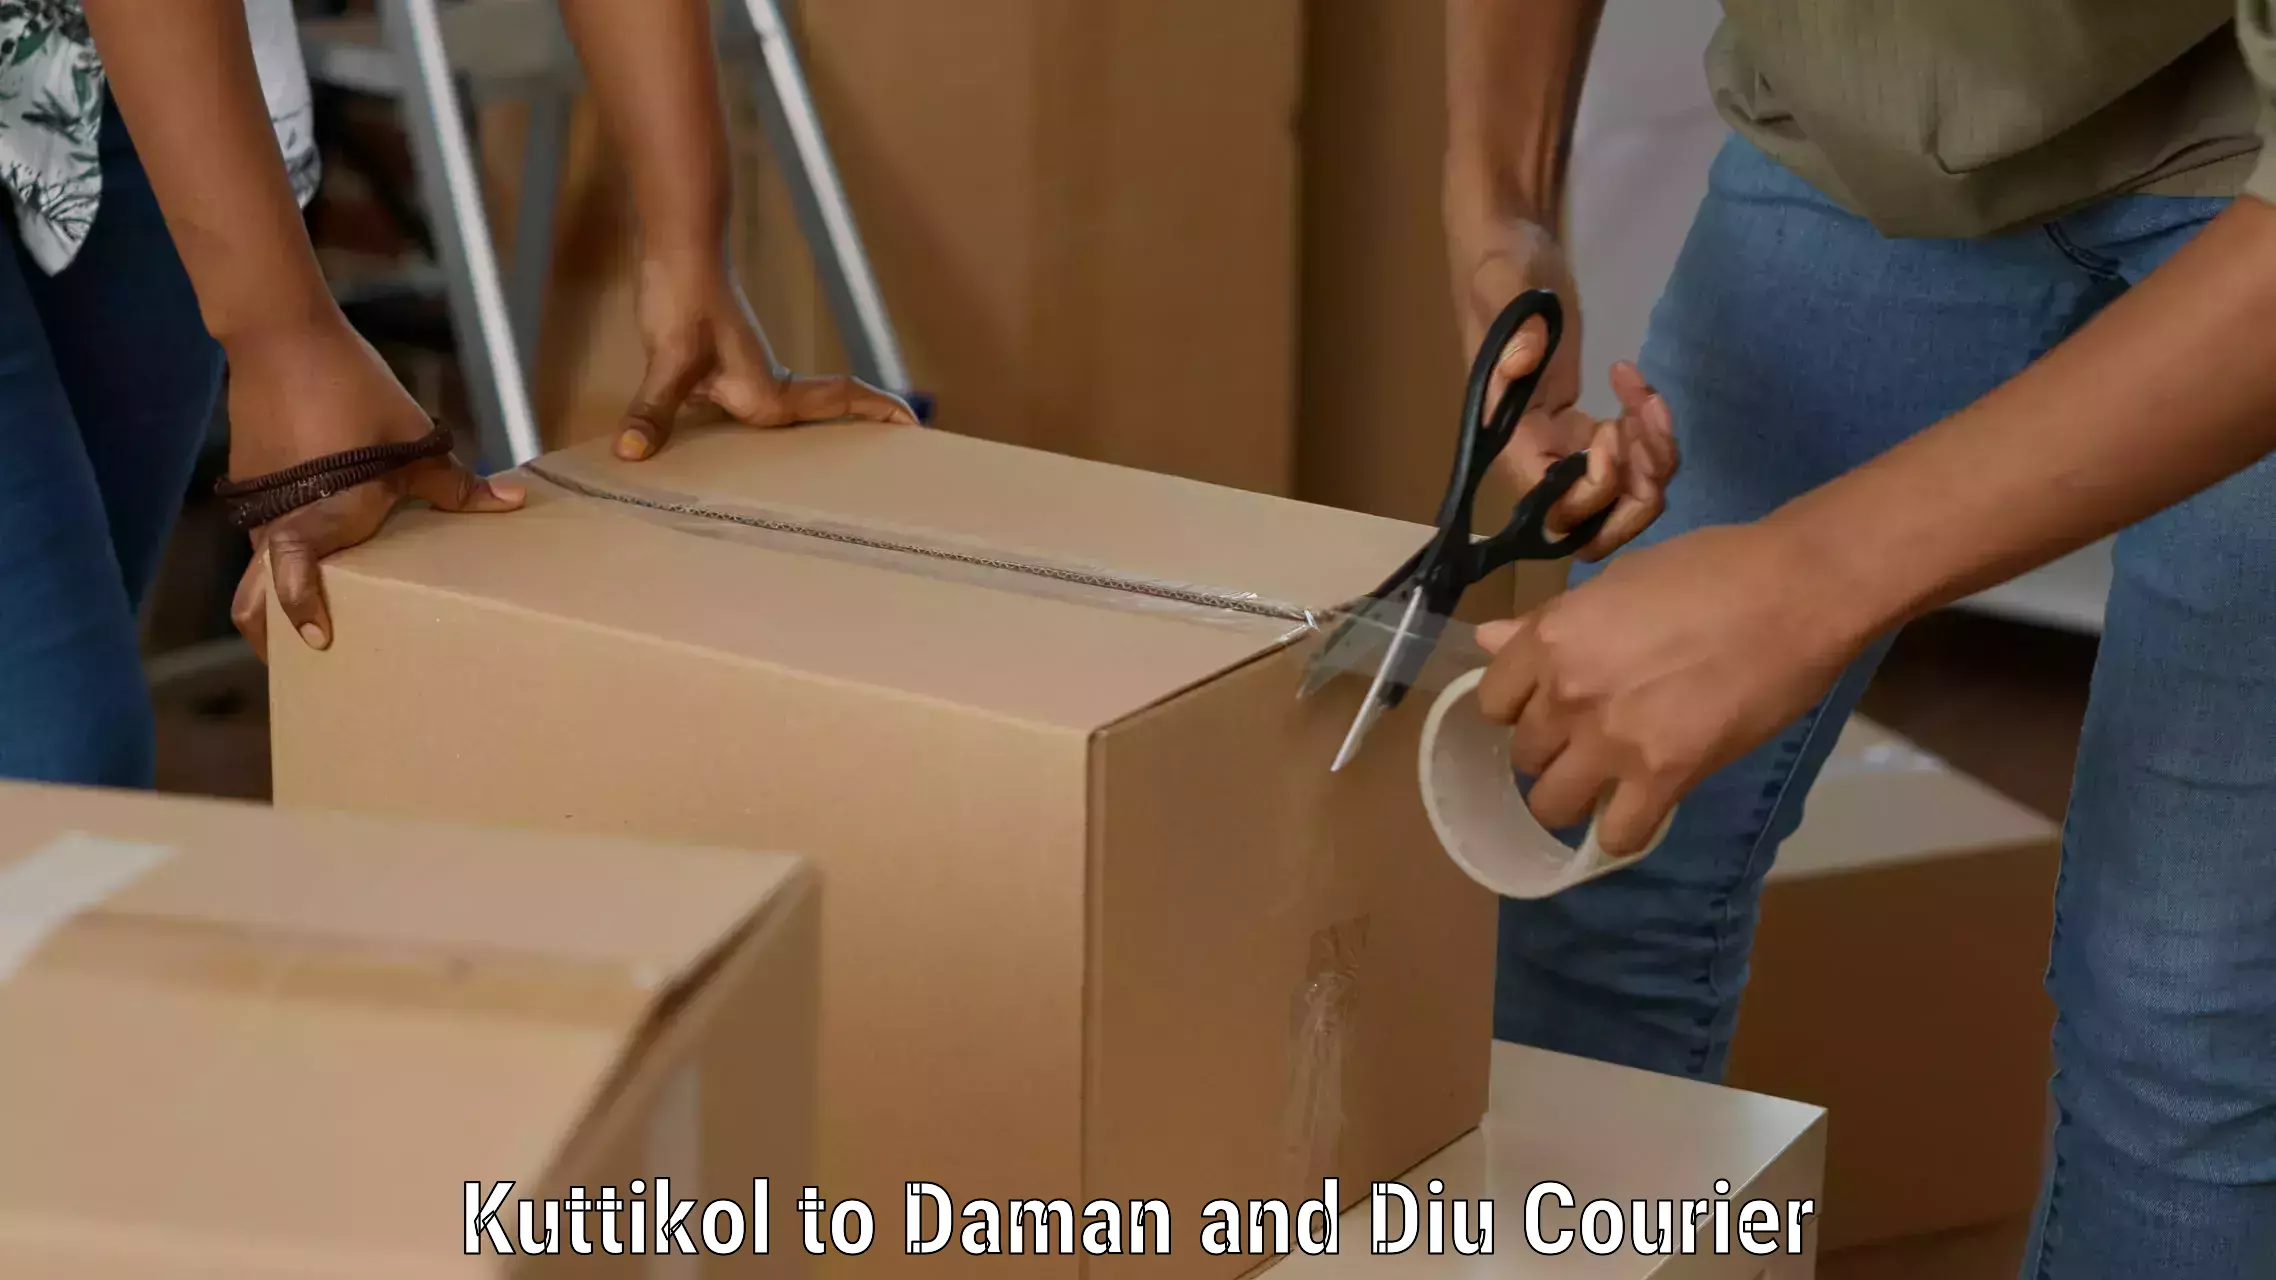 Same-day delivery options Kuttikol to Diu